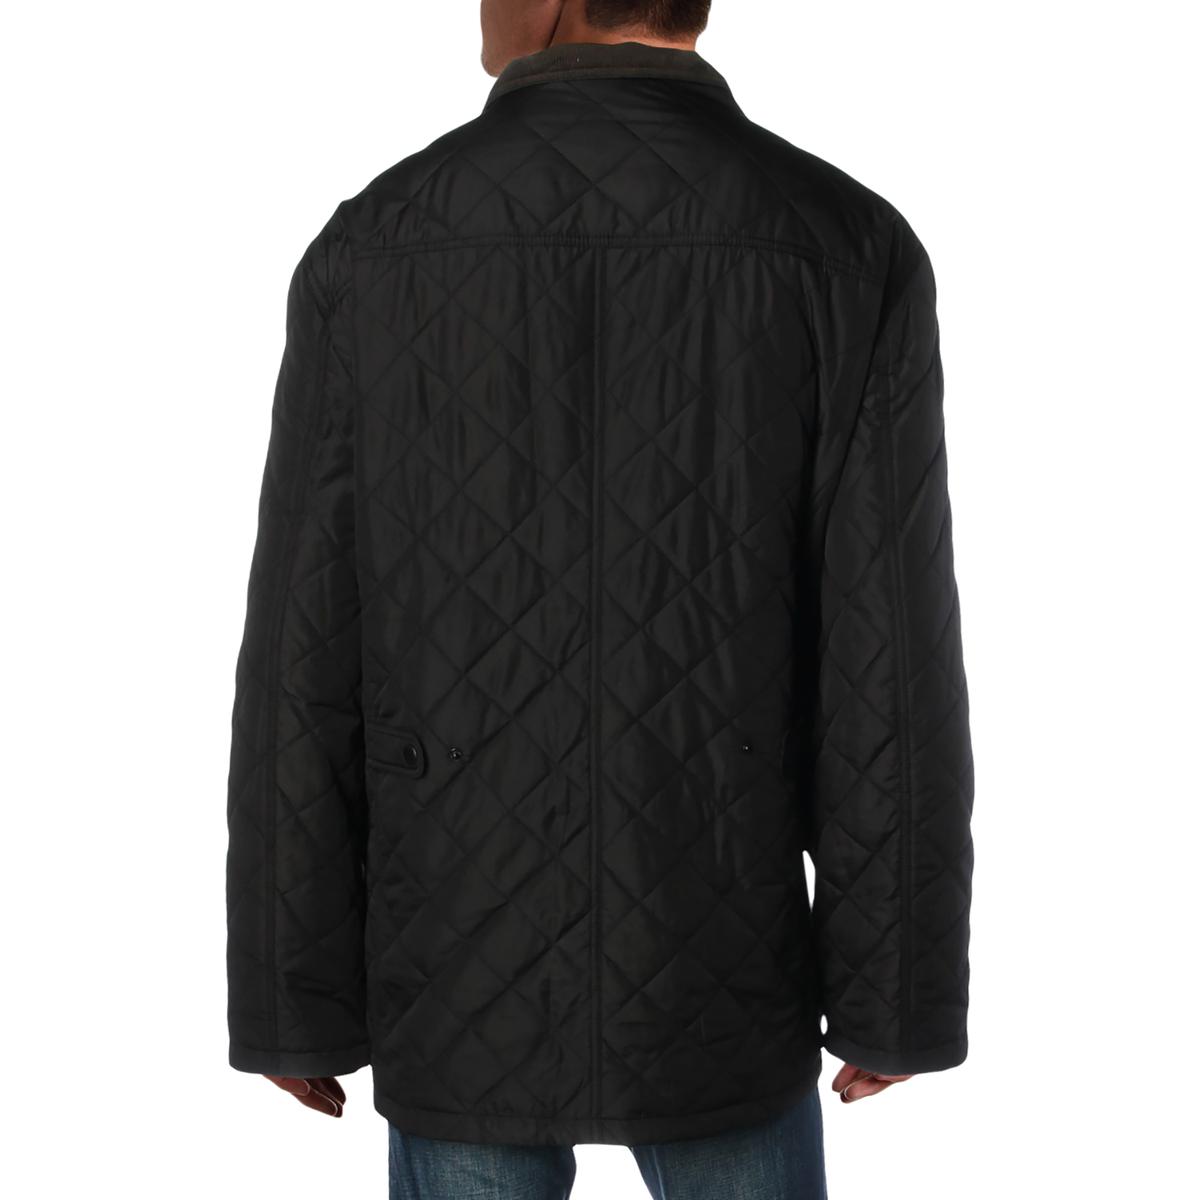 London Fog Mens Black Winter Quilted Coat Outerwear Big & Tall 3XLT ...